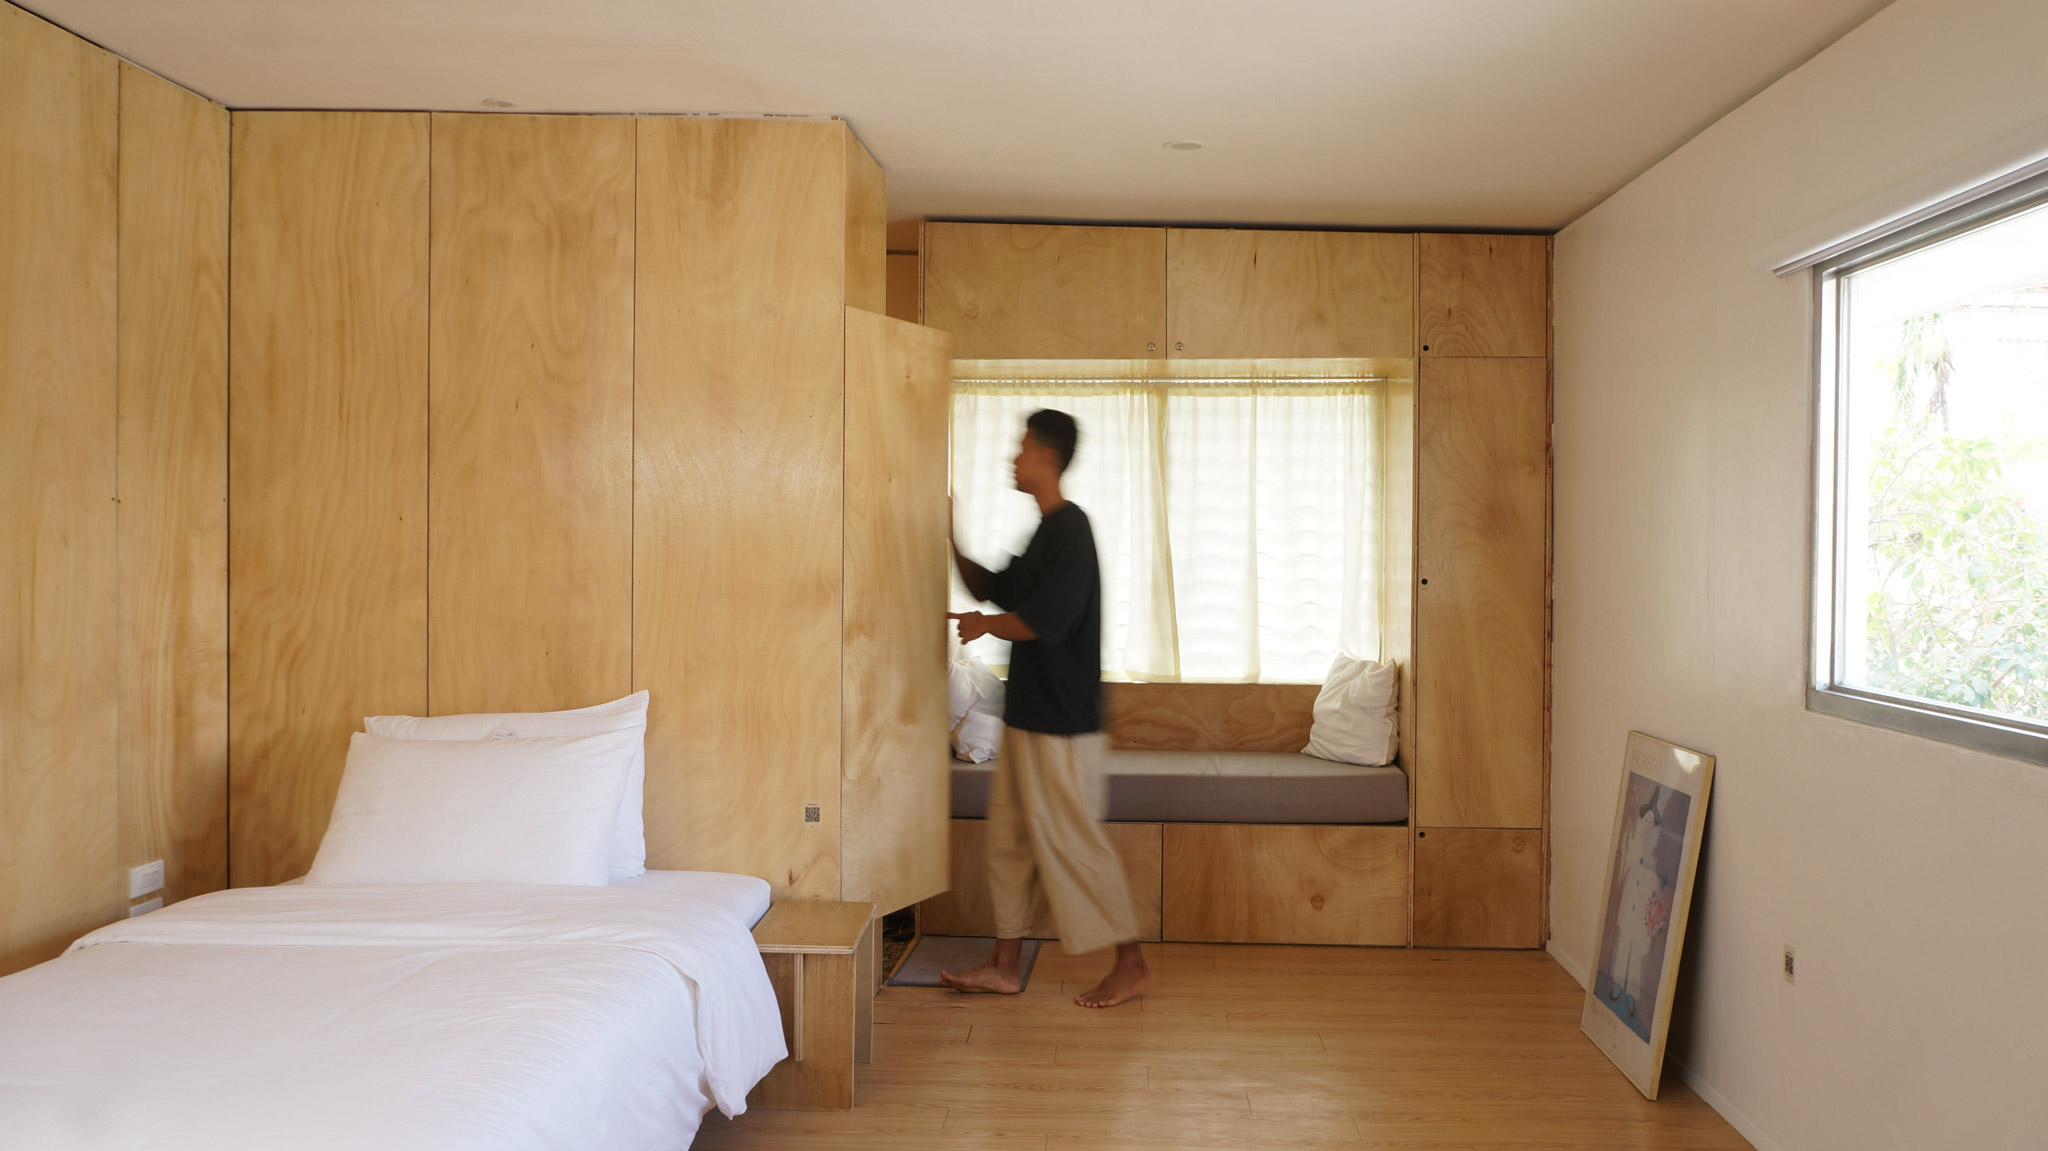 A man opens a closet next to a window seat surrounded by built-in cabinetry. A bed with white linens can also be seen.